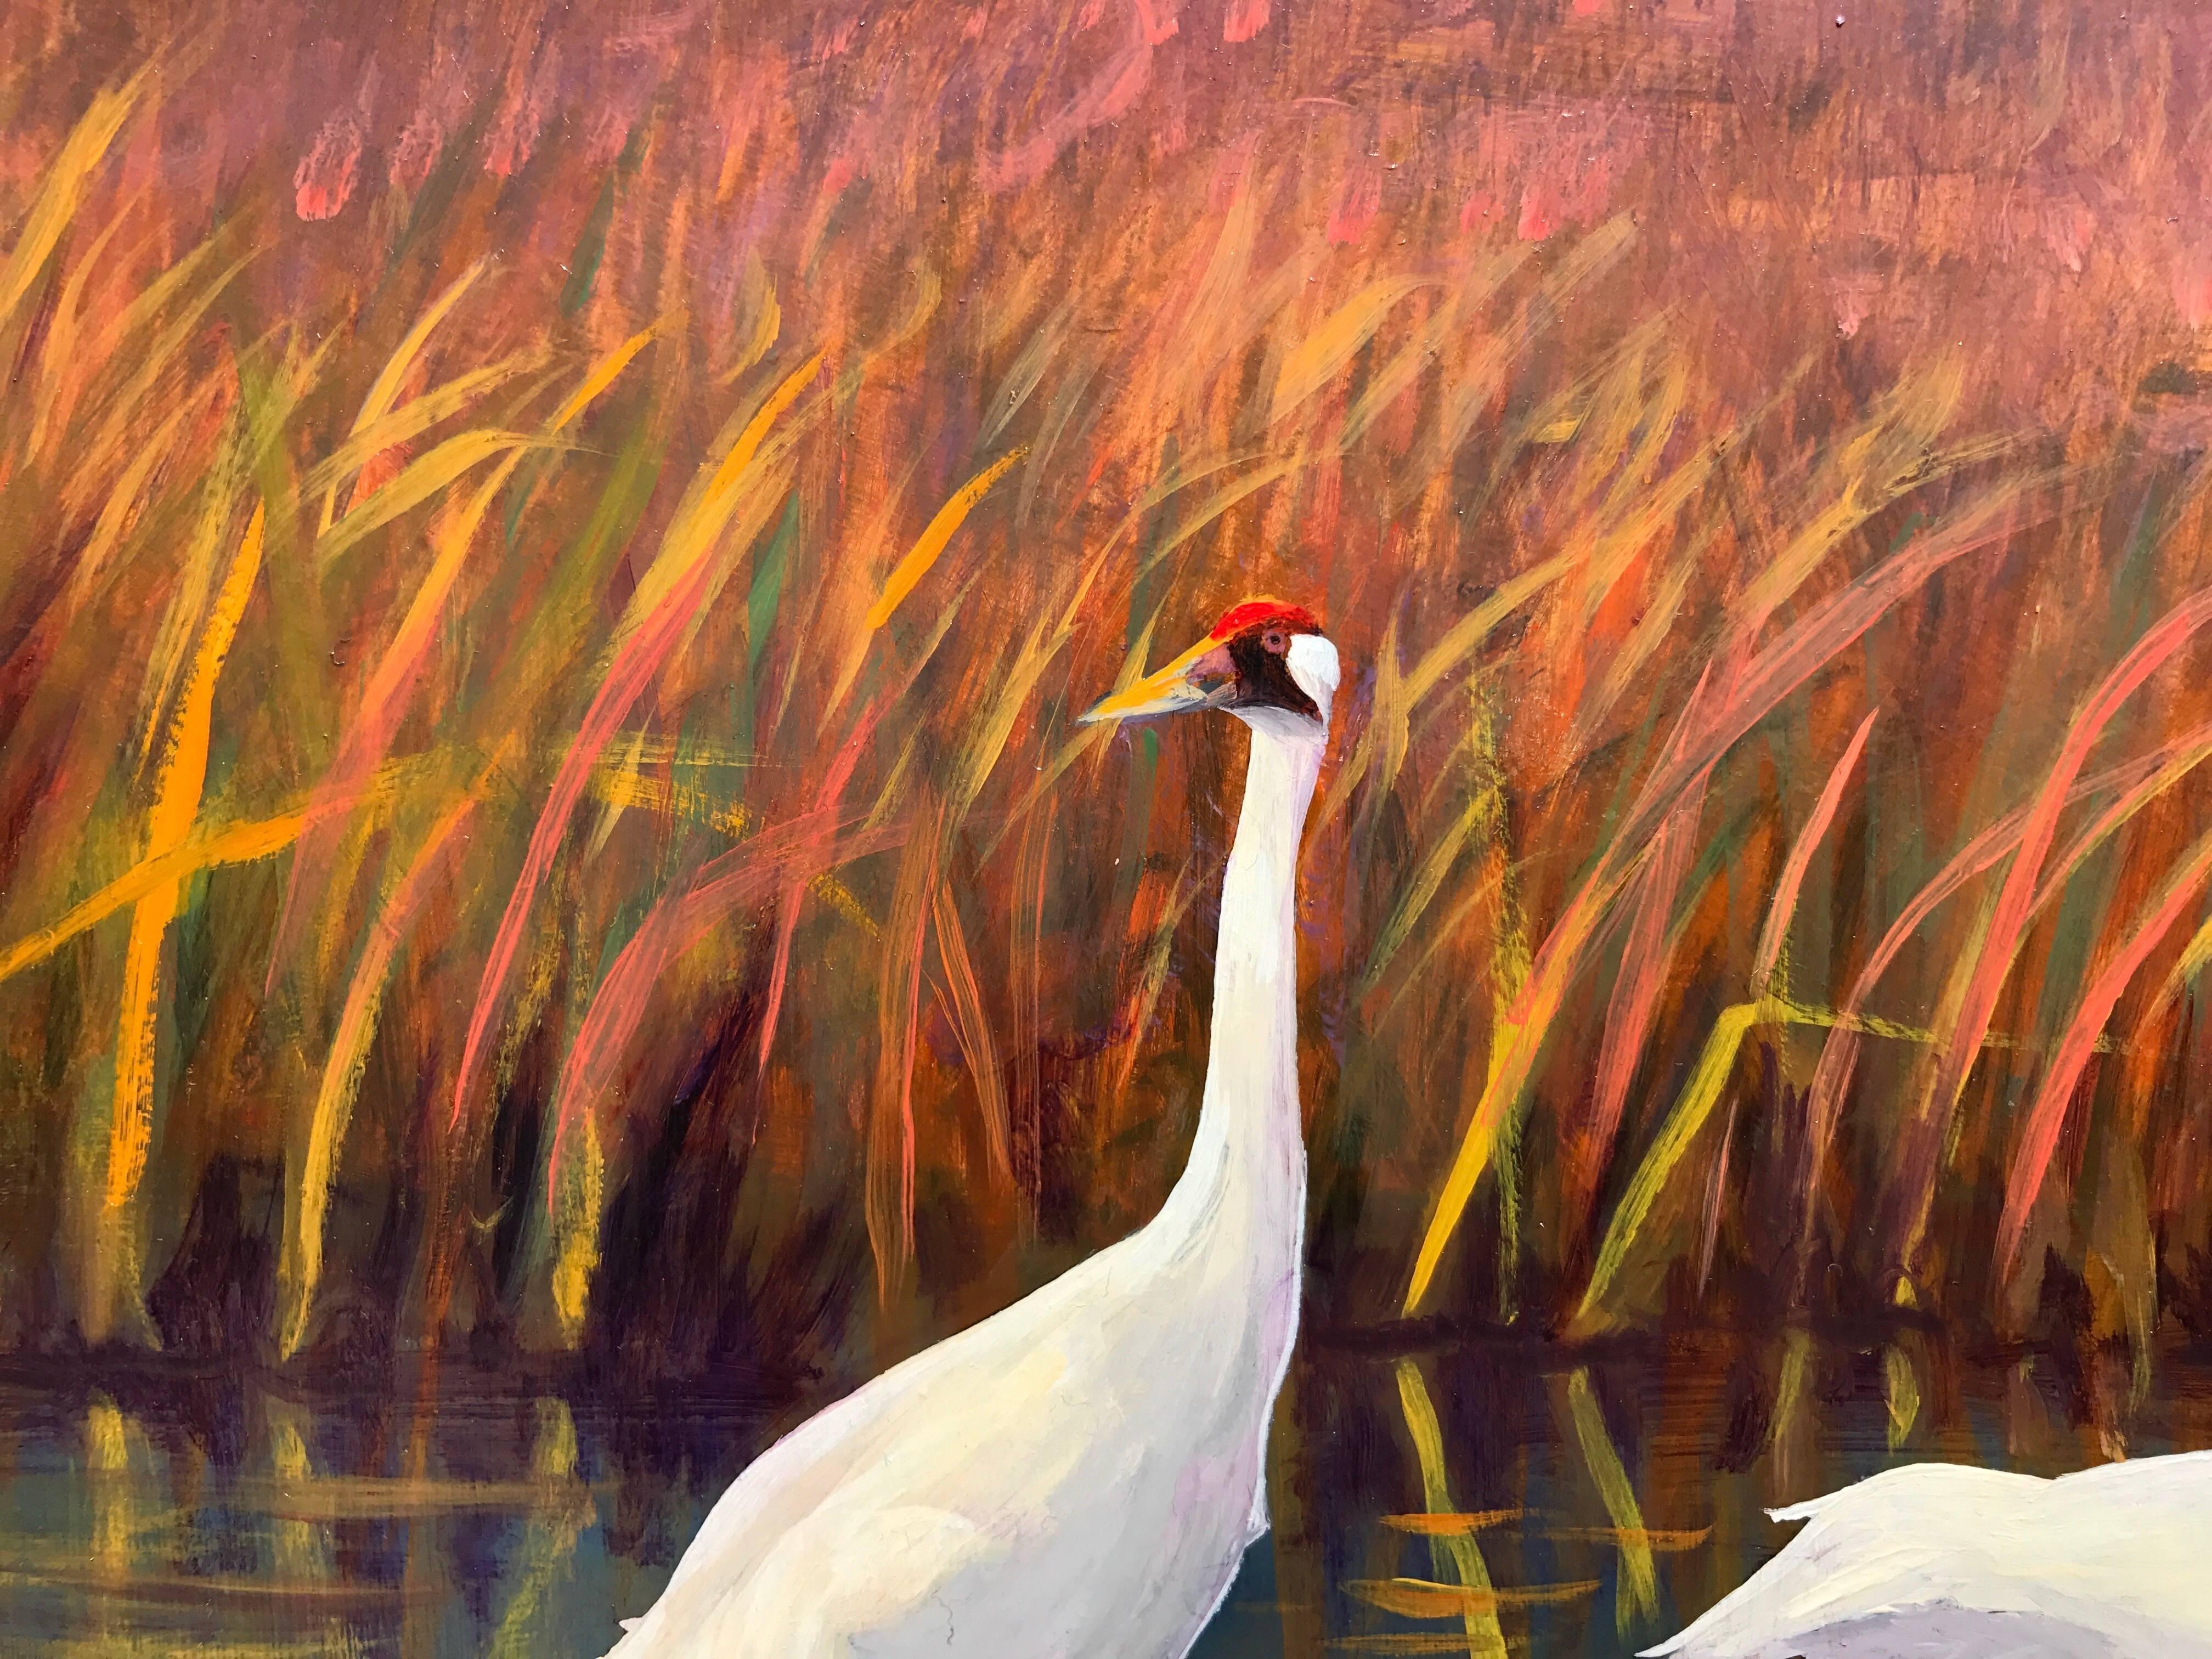 Whooping Cranes Feeding - Painting by David Swantner